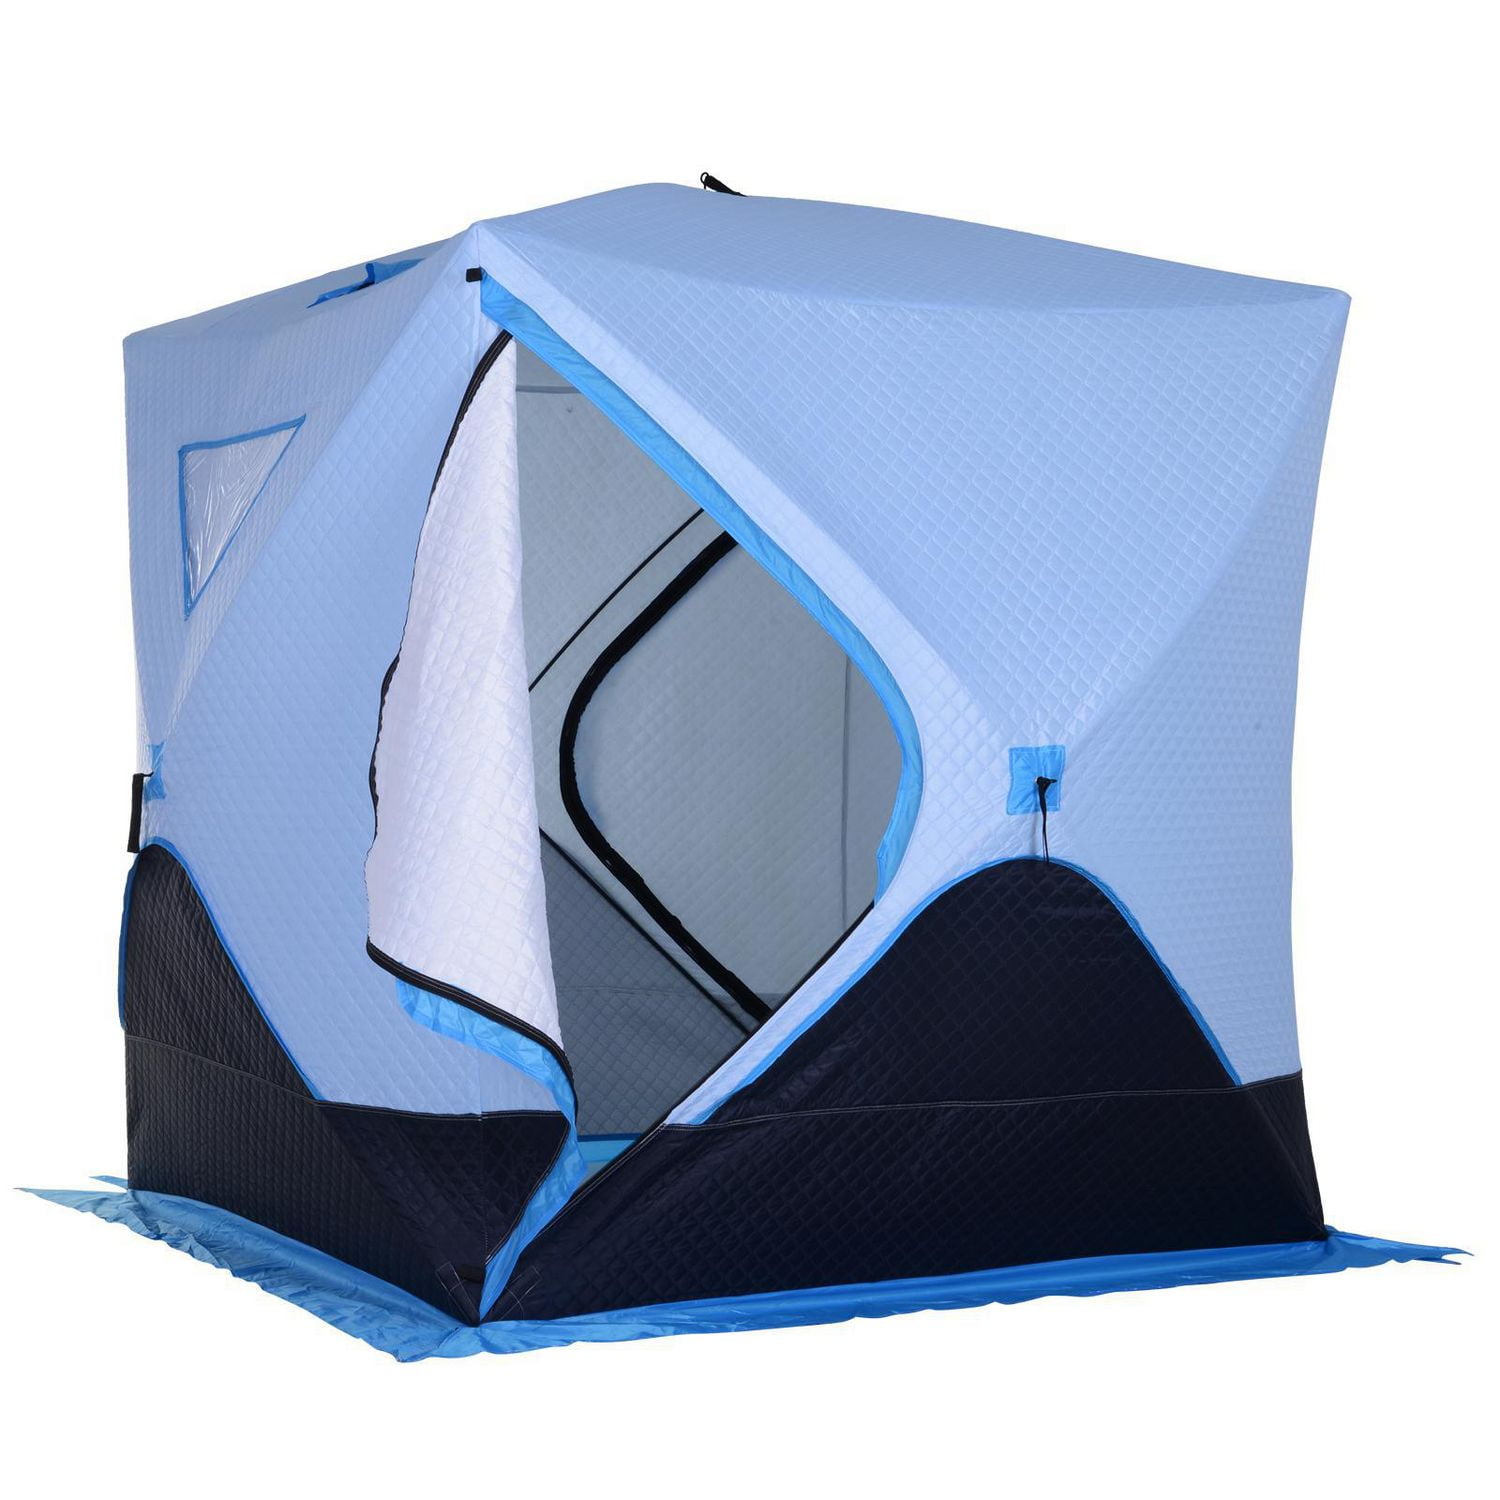 Outsunny 4-Person Portable Composite Ice Fishing Tent AB1-003